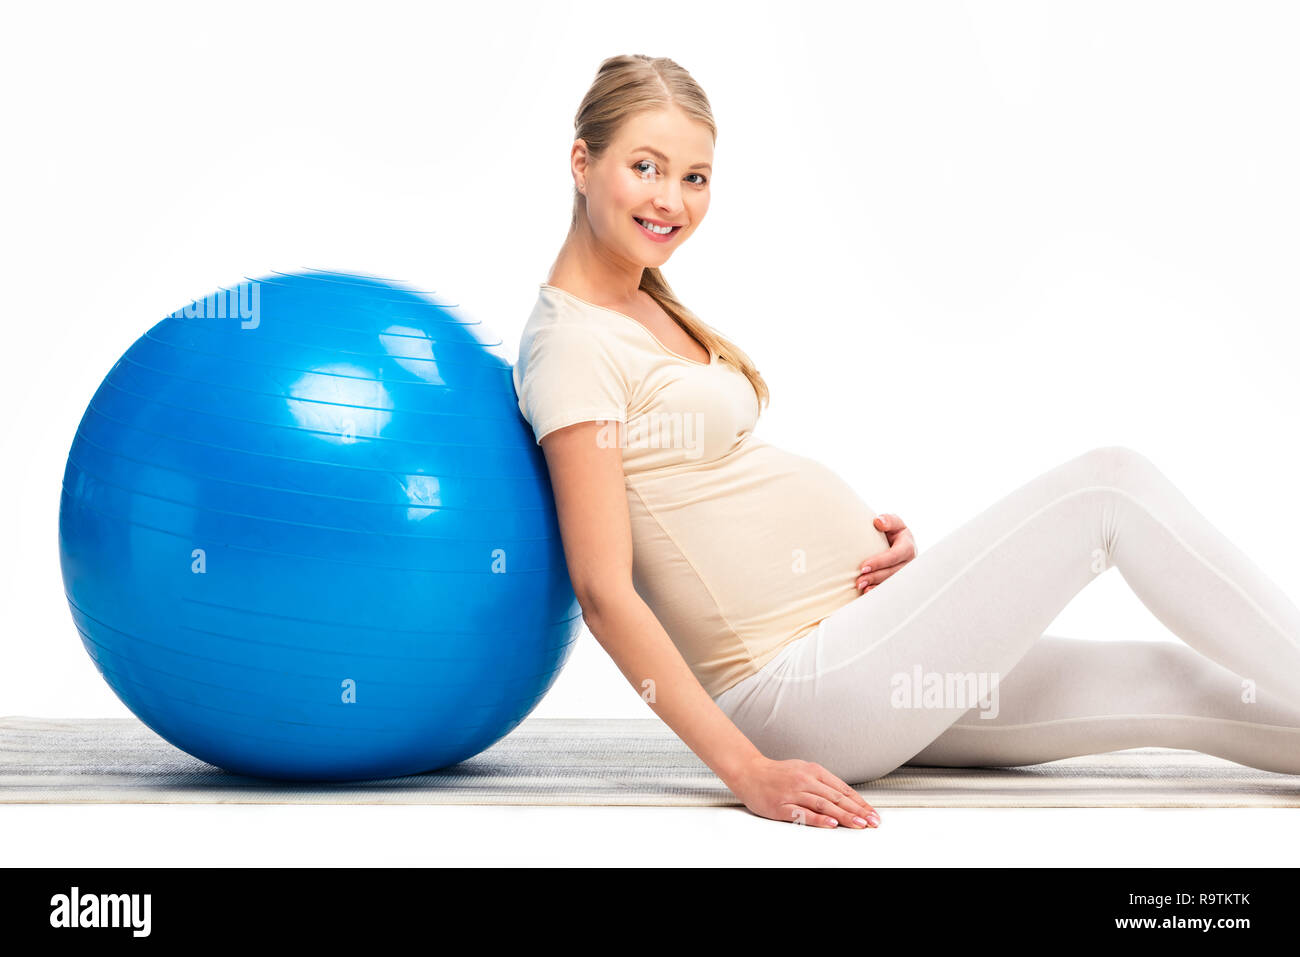 Smiling pregnant woman leaning on blue fitness ball isolated on white Banque D'Images